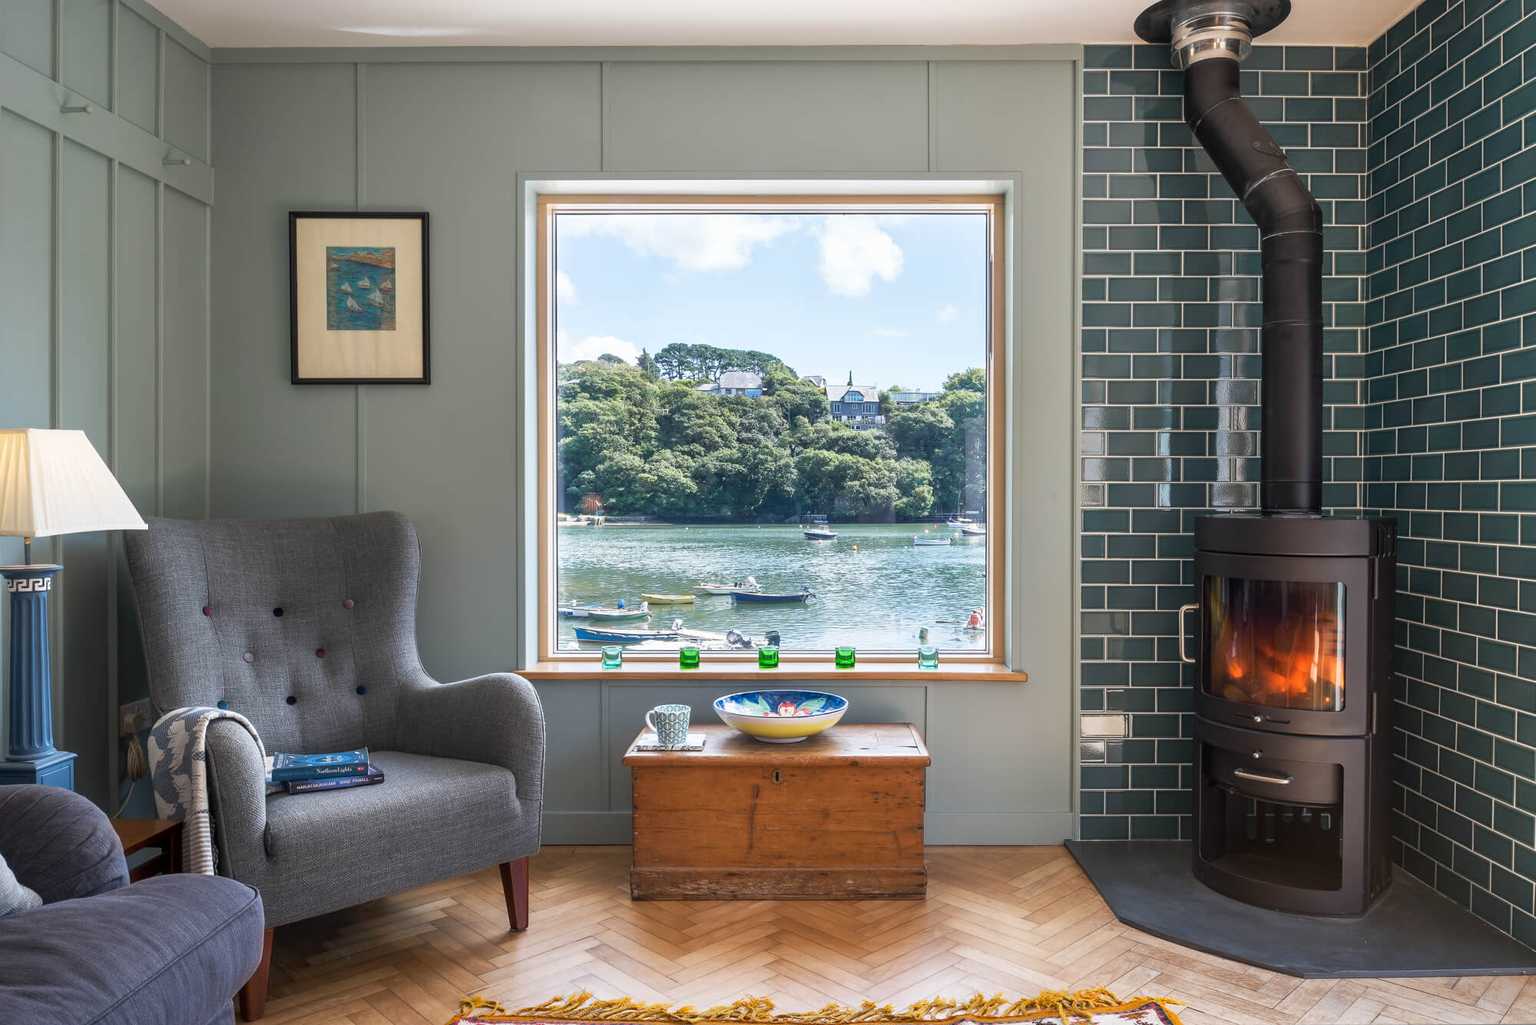 Sea view holiday home overlooking the Helford River in Falmouth